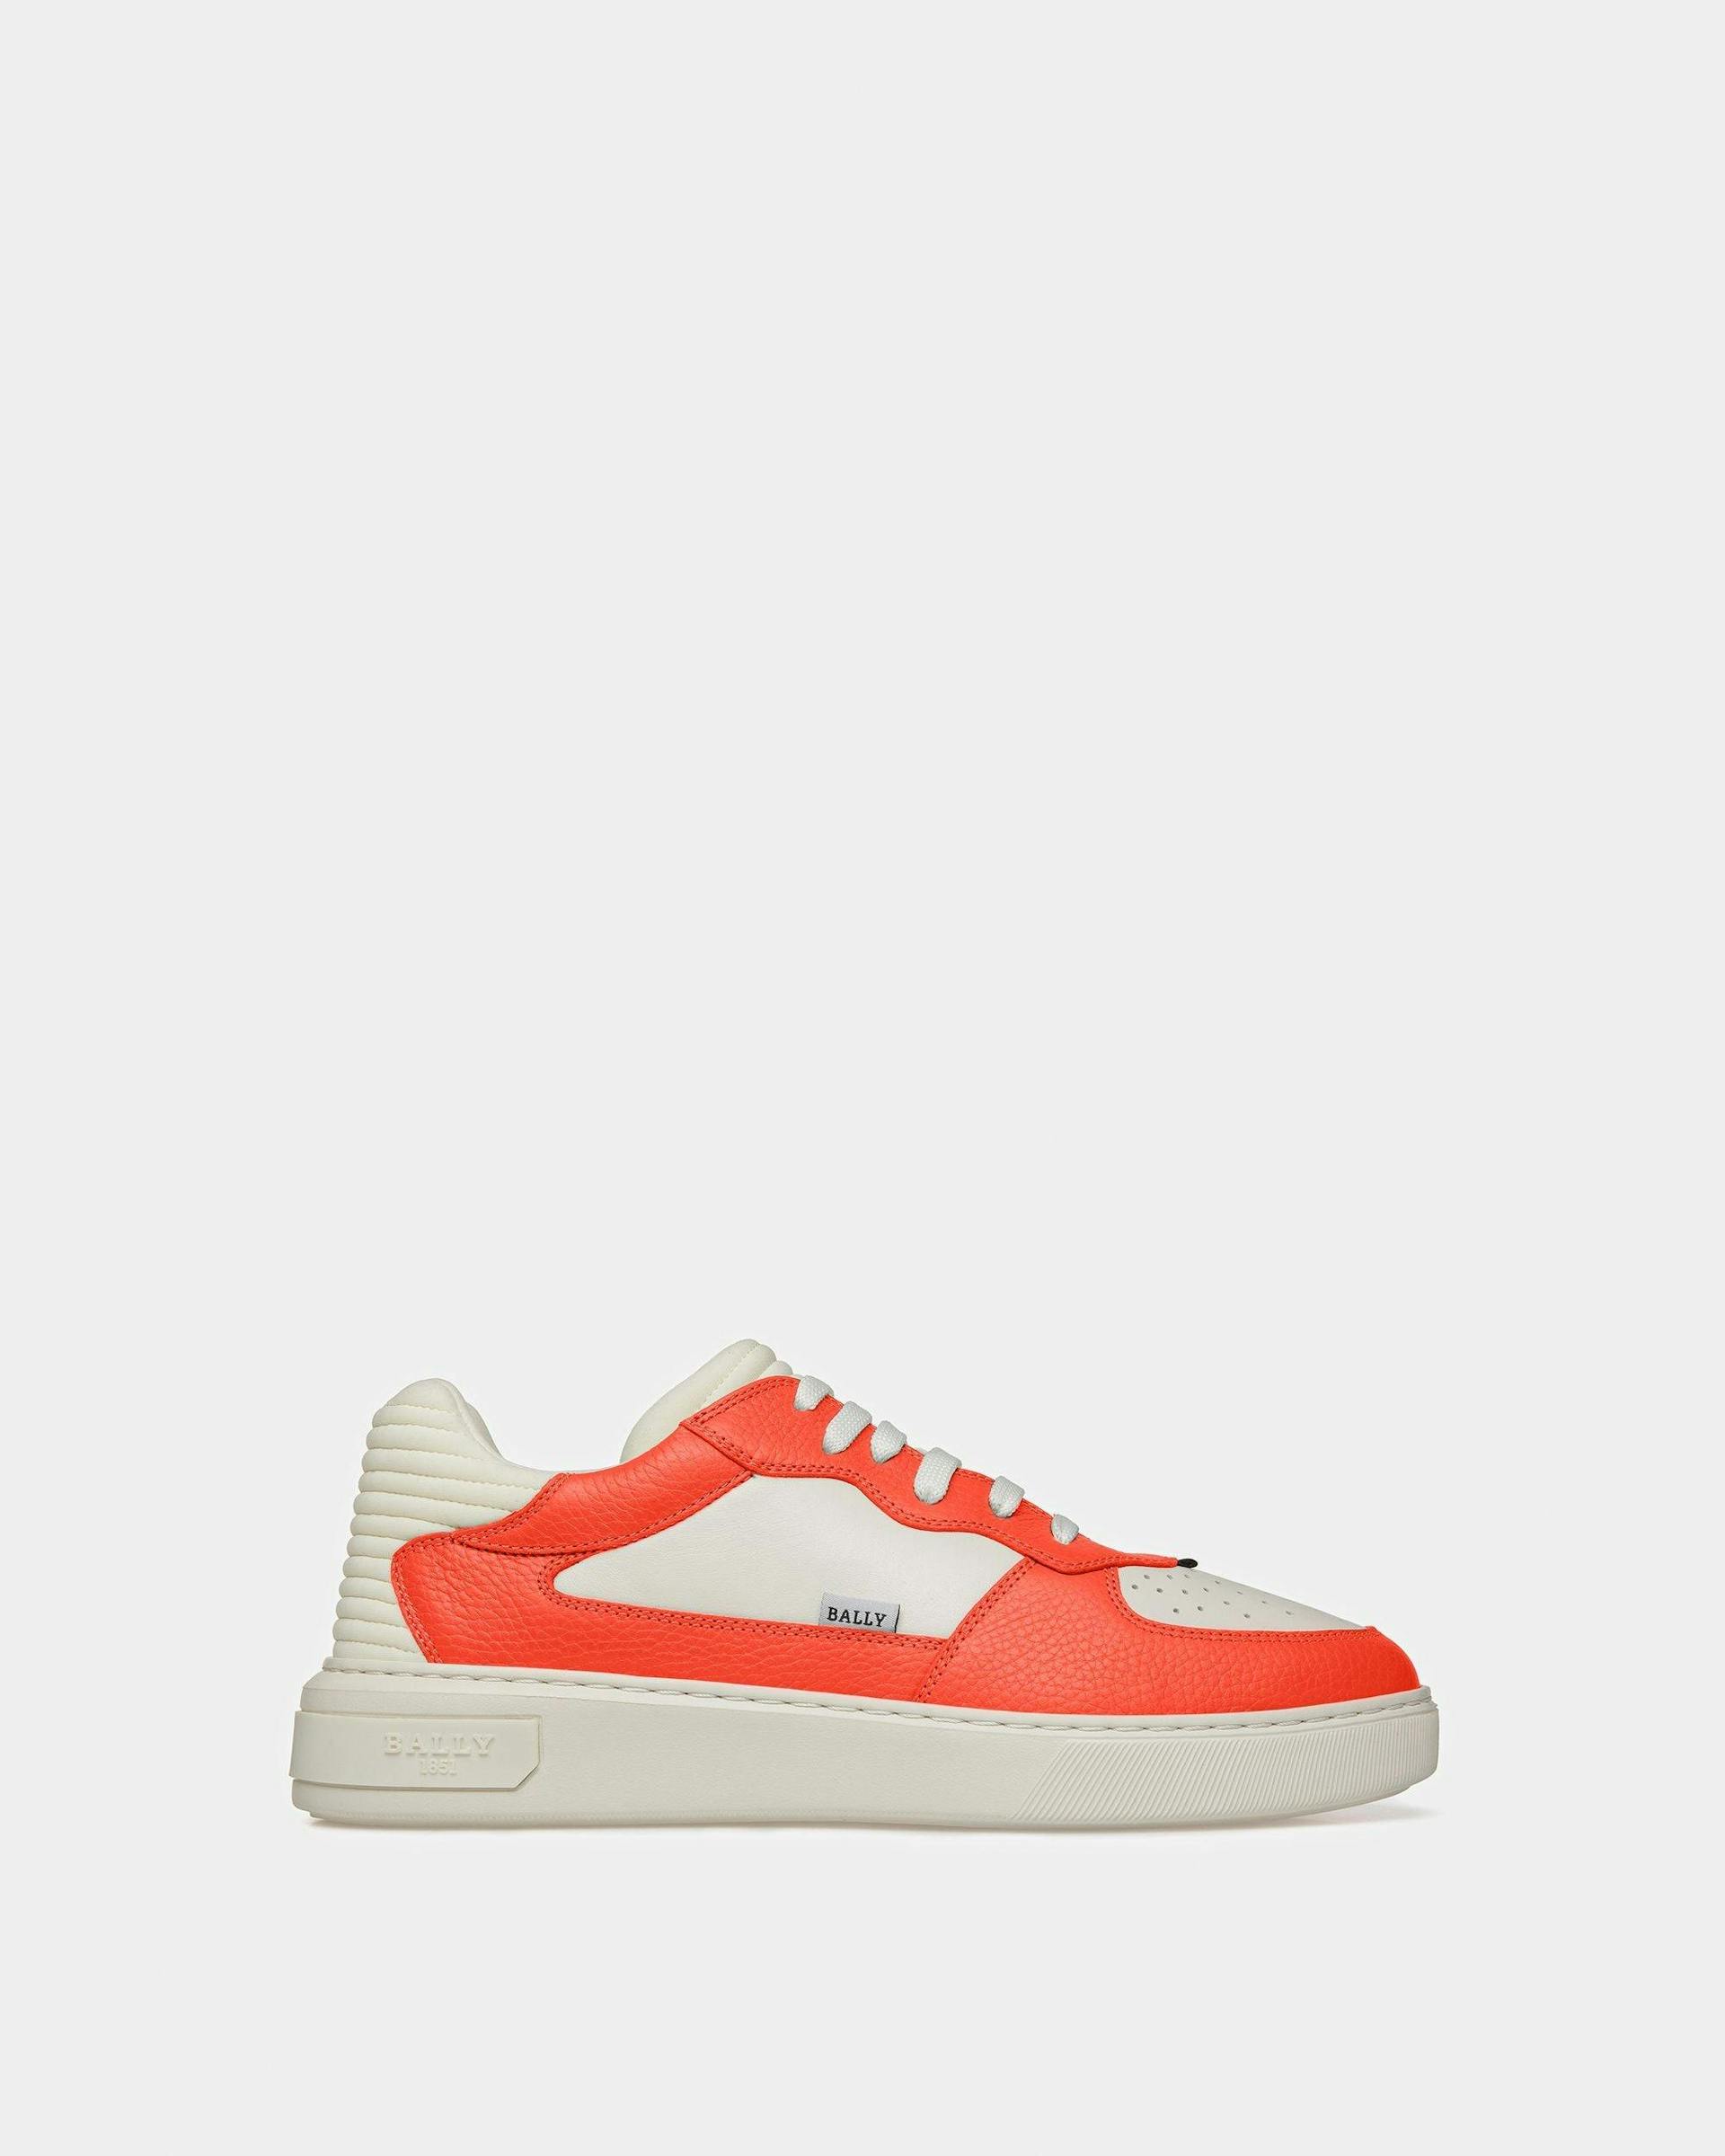 Mark Leather Sneakers In Orange And White - Men's - Bally - 01